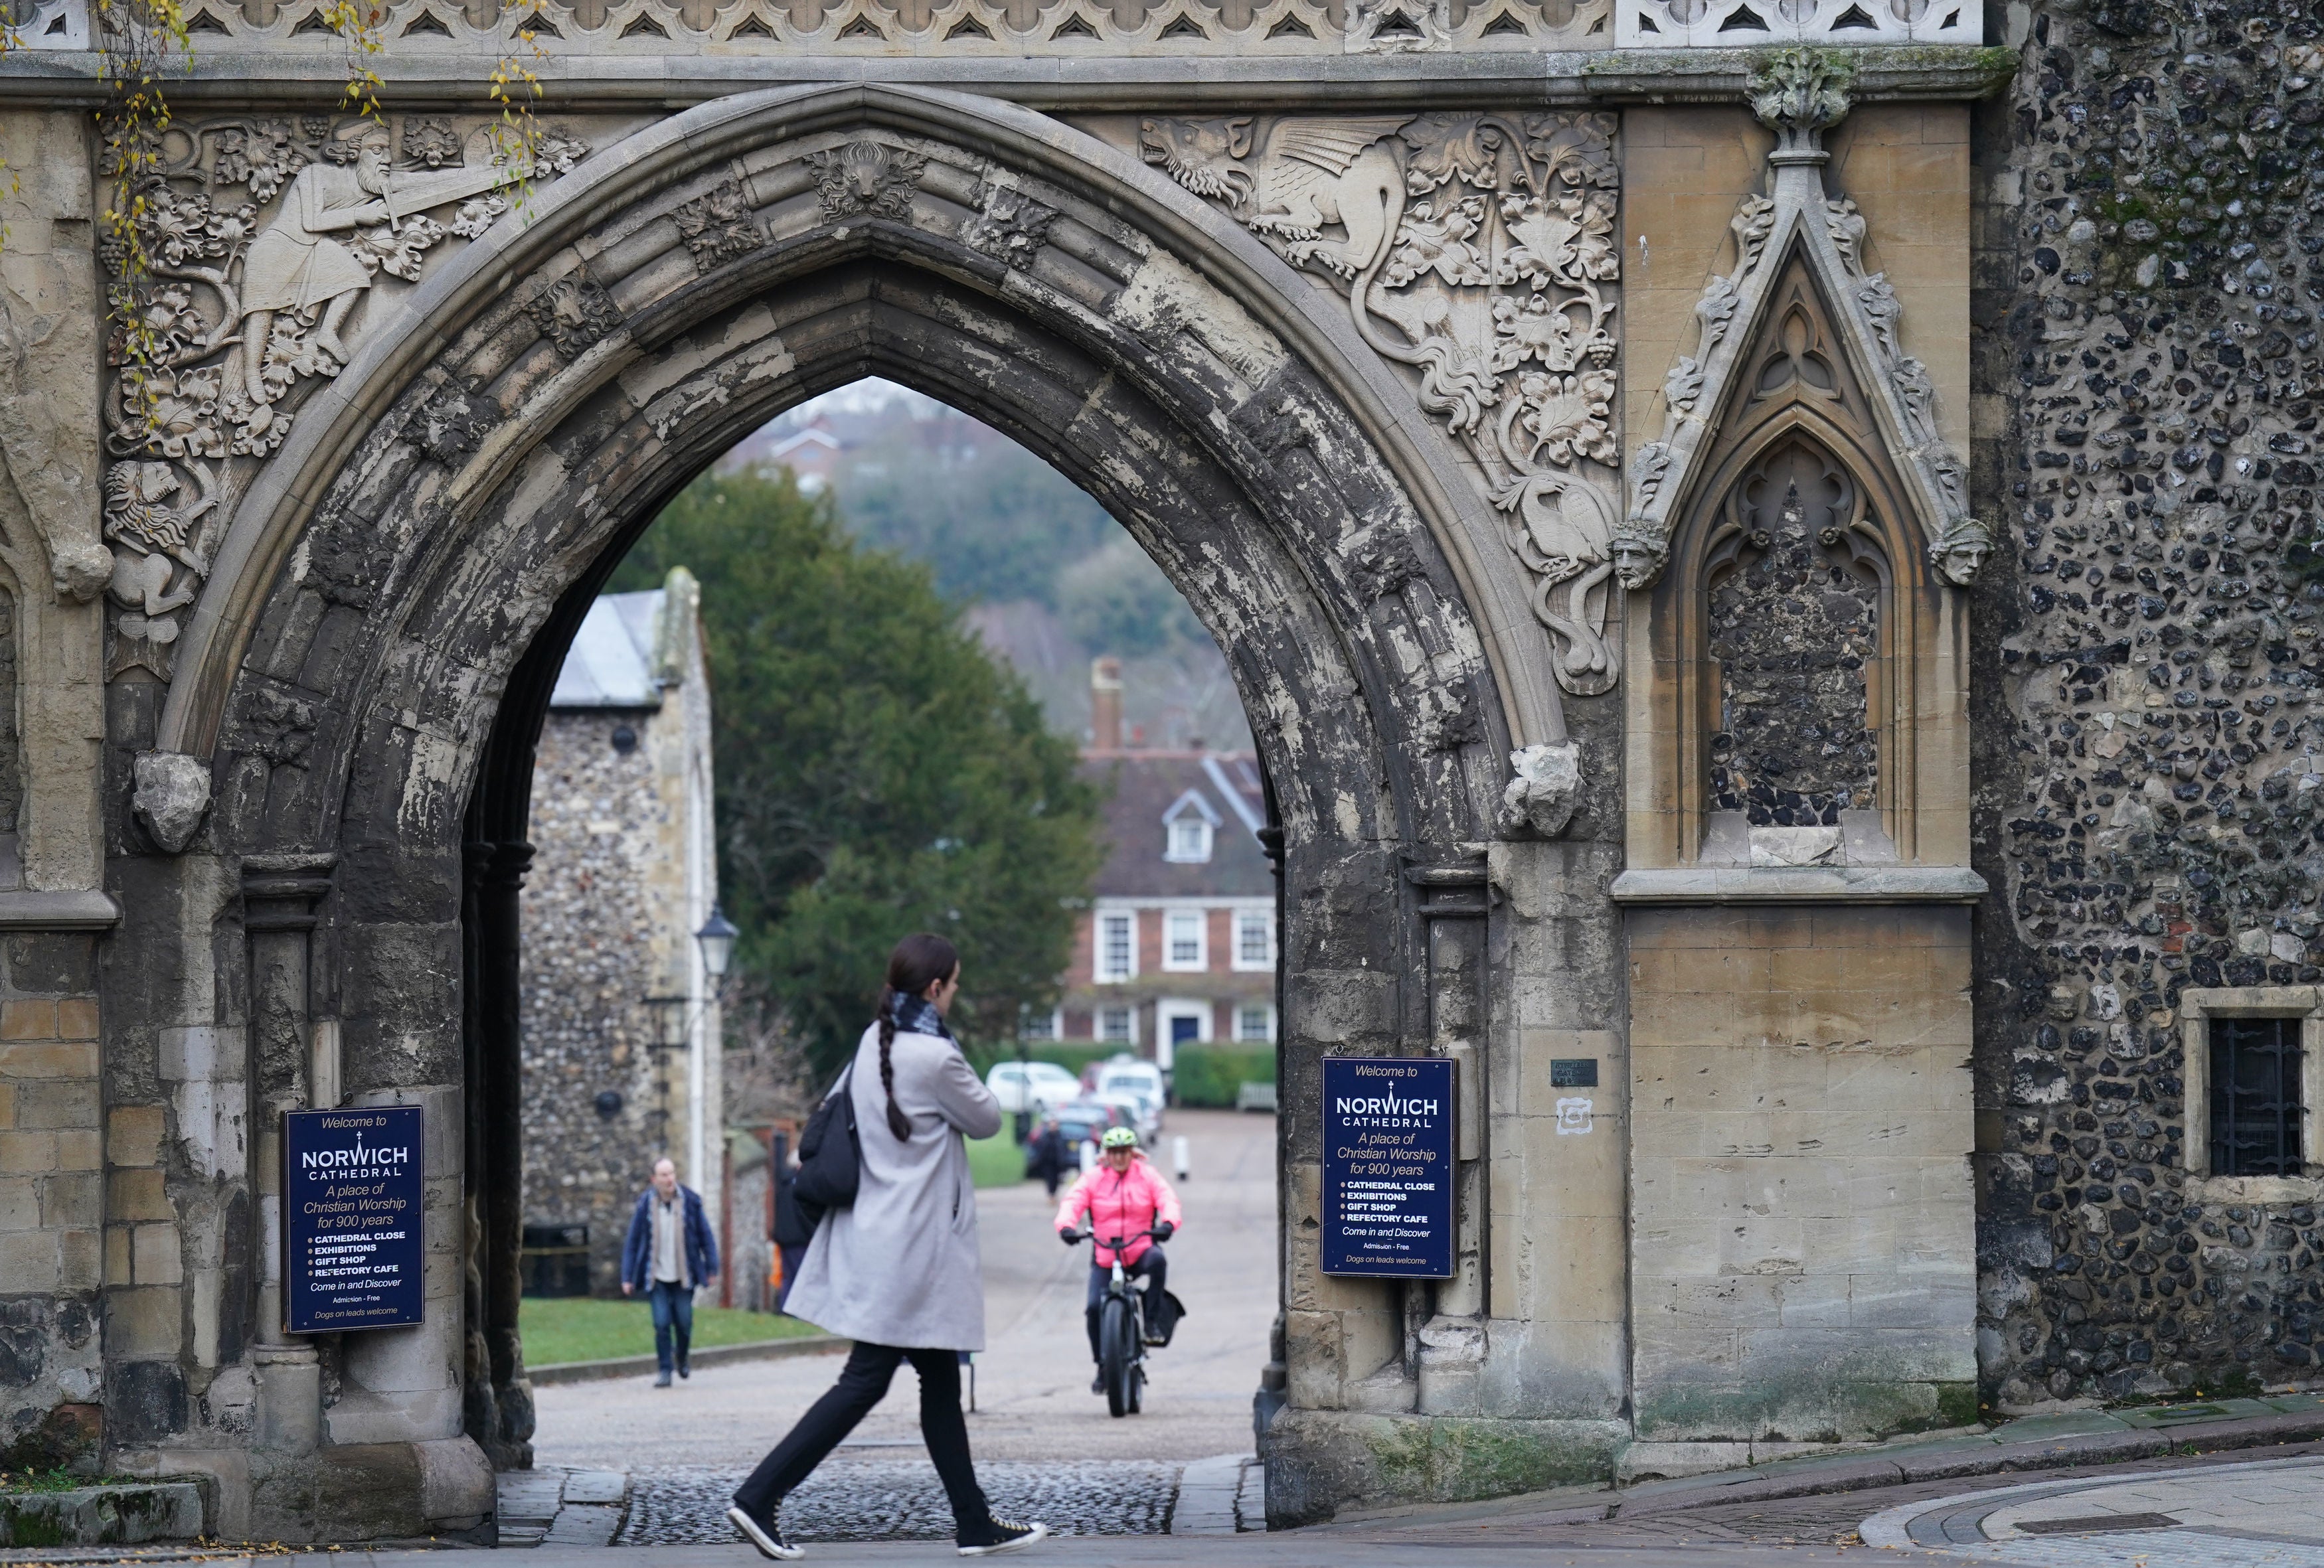 <p>She leaves the cathedral through this archway 34 minutes later at 3:22pm</p>